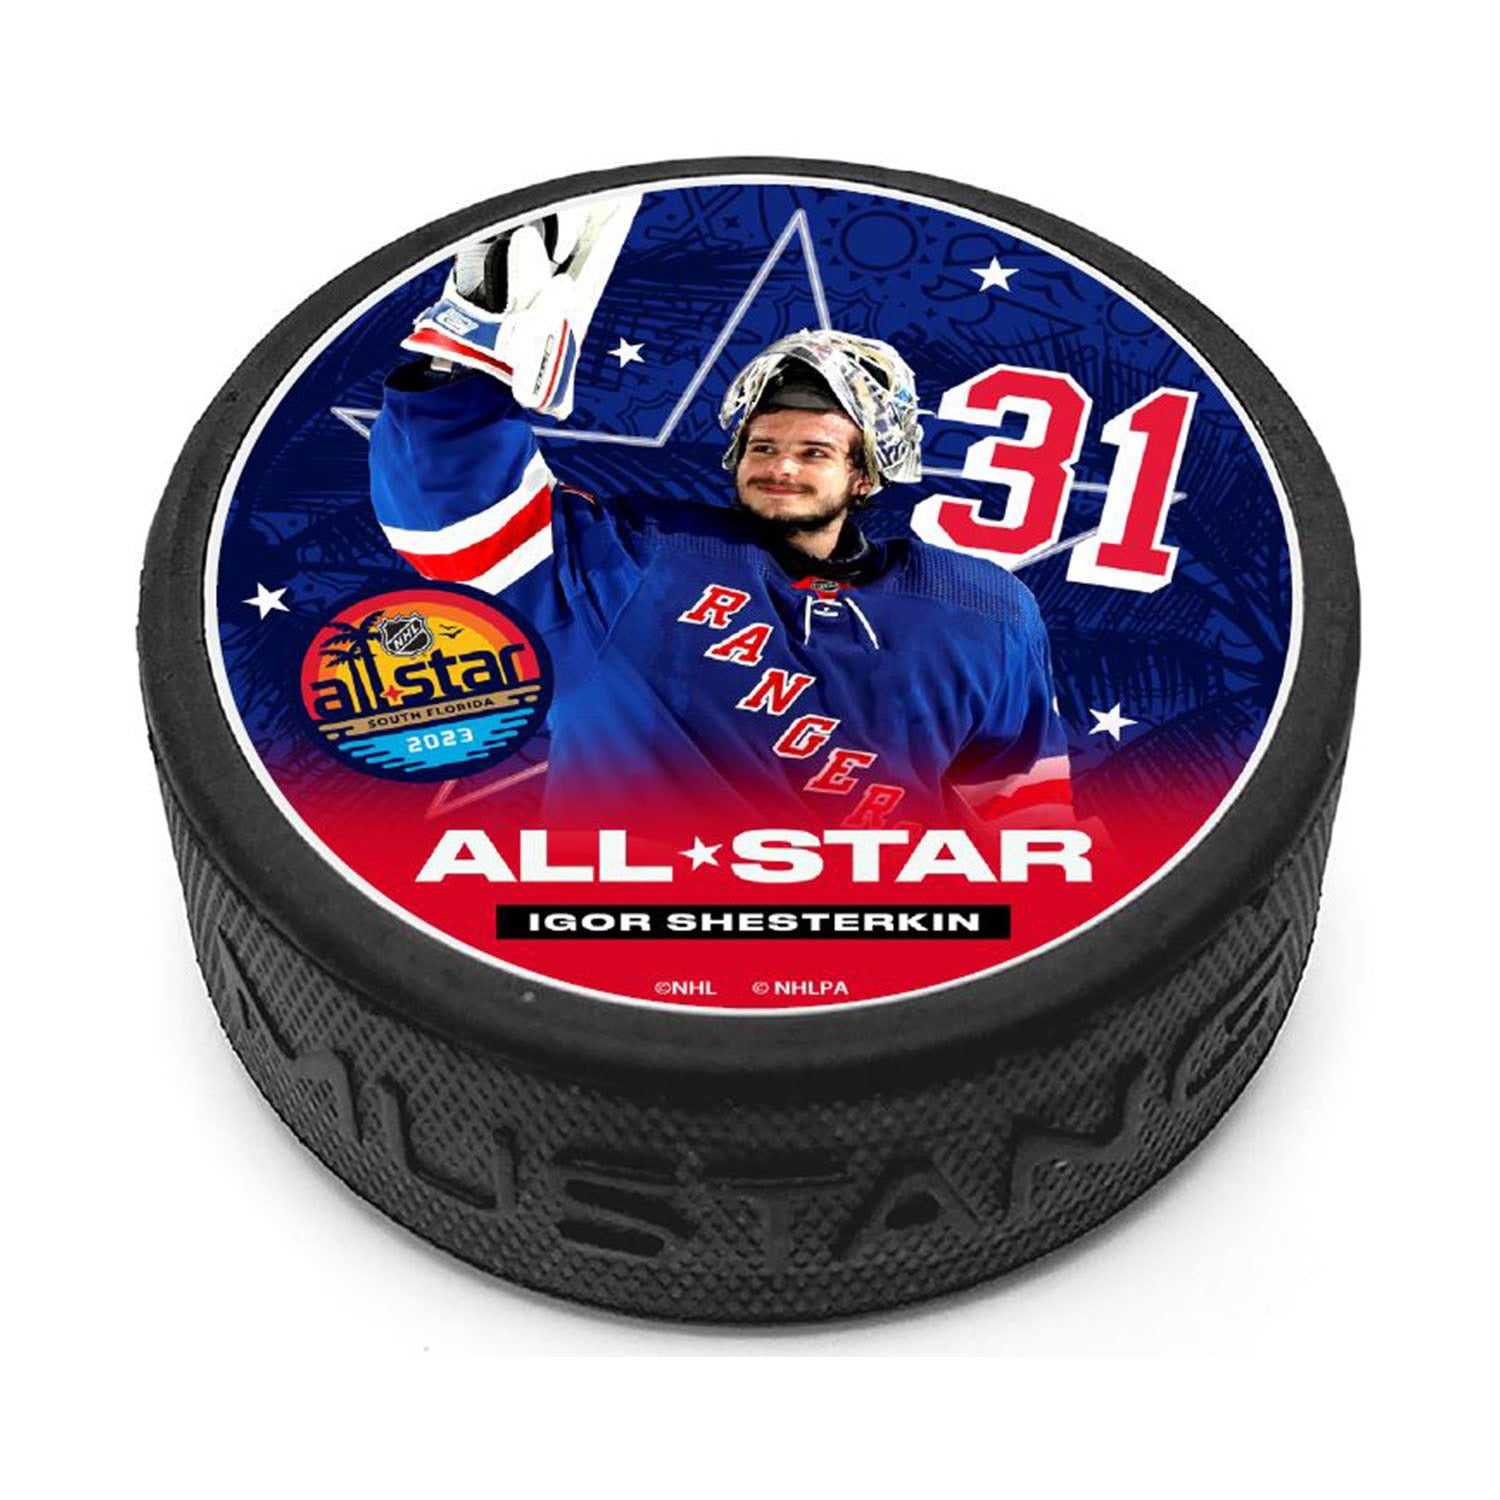 Mustang Igor Shesterkin All Star Game Puck In Black - Front View